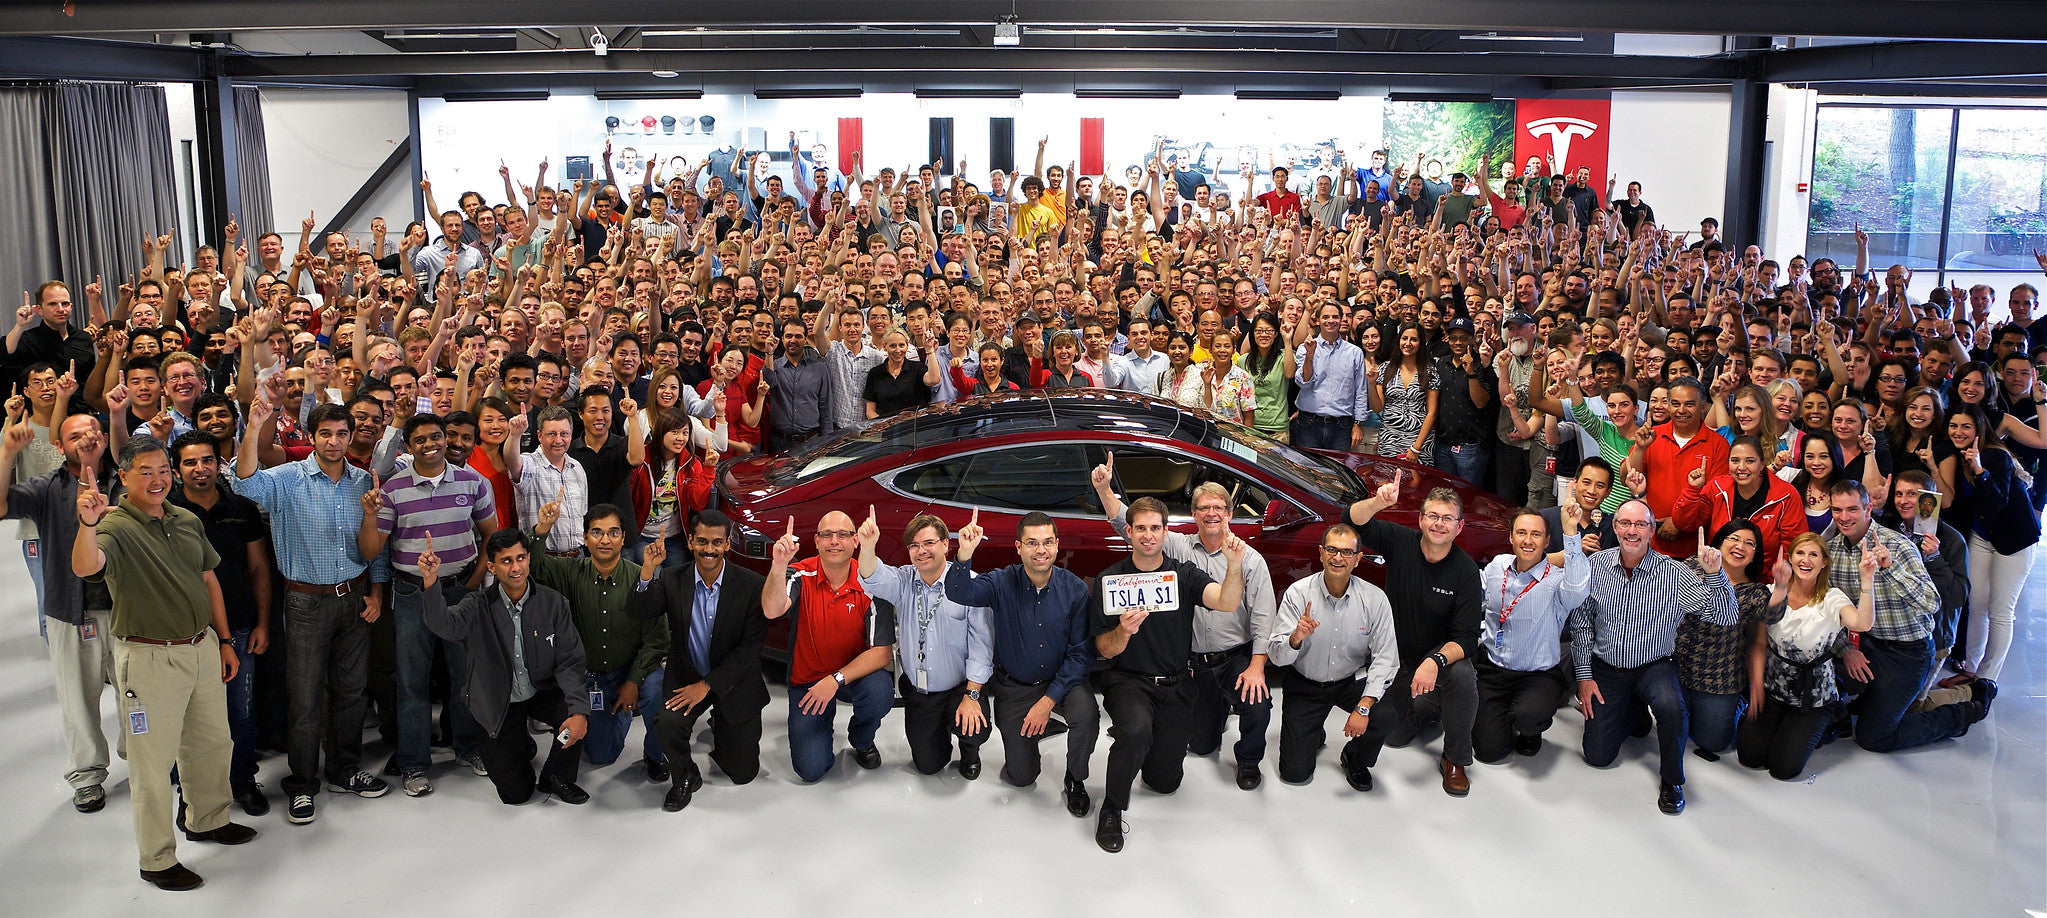 Tesla's Secret Weapon in Focus: How an Army of Enthusiasts is Disrupting the Auto Industry